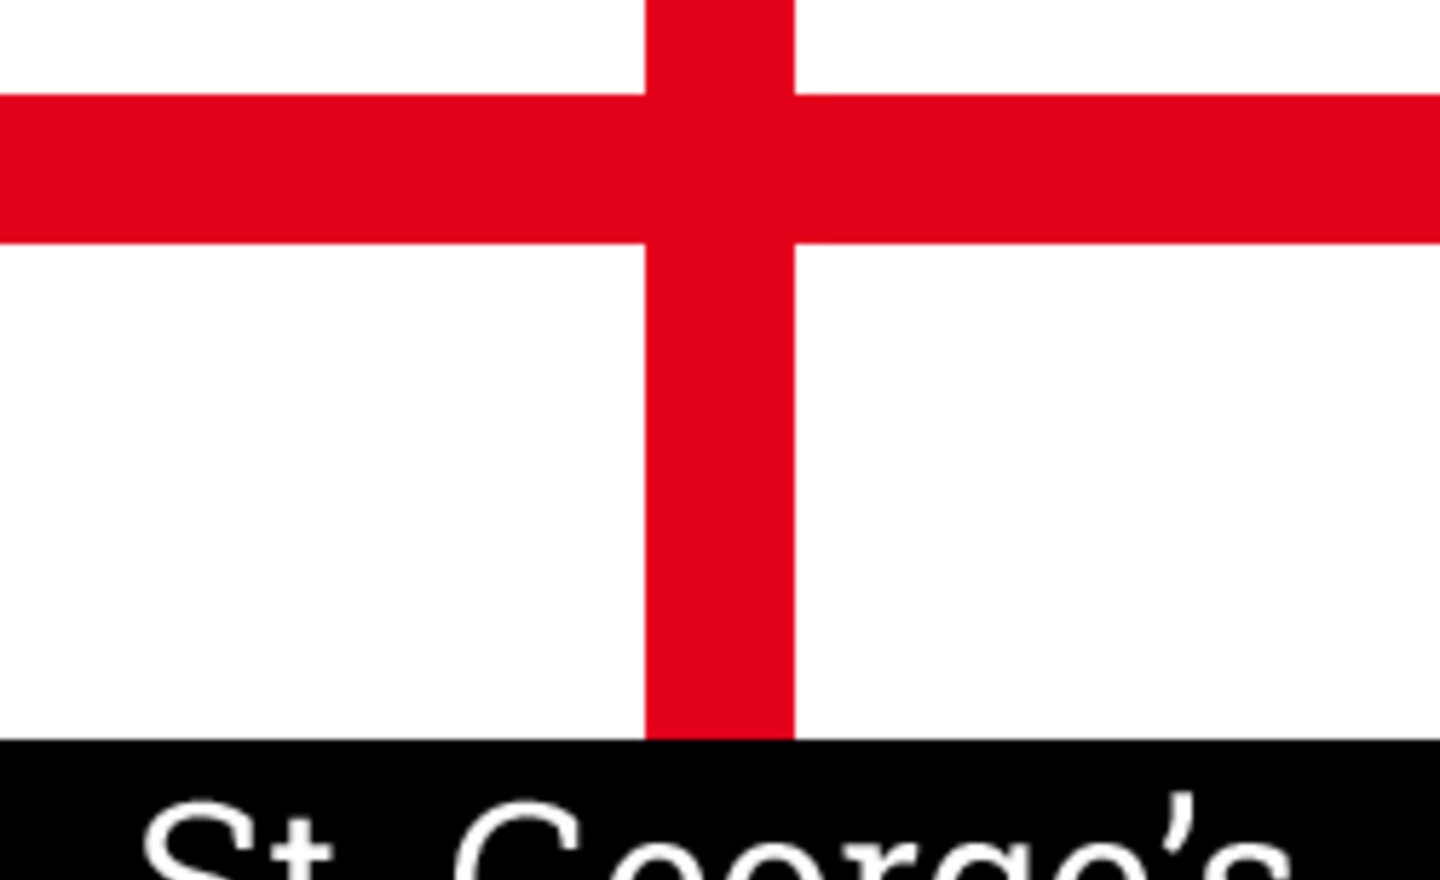 Image of St George's day challenge.